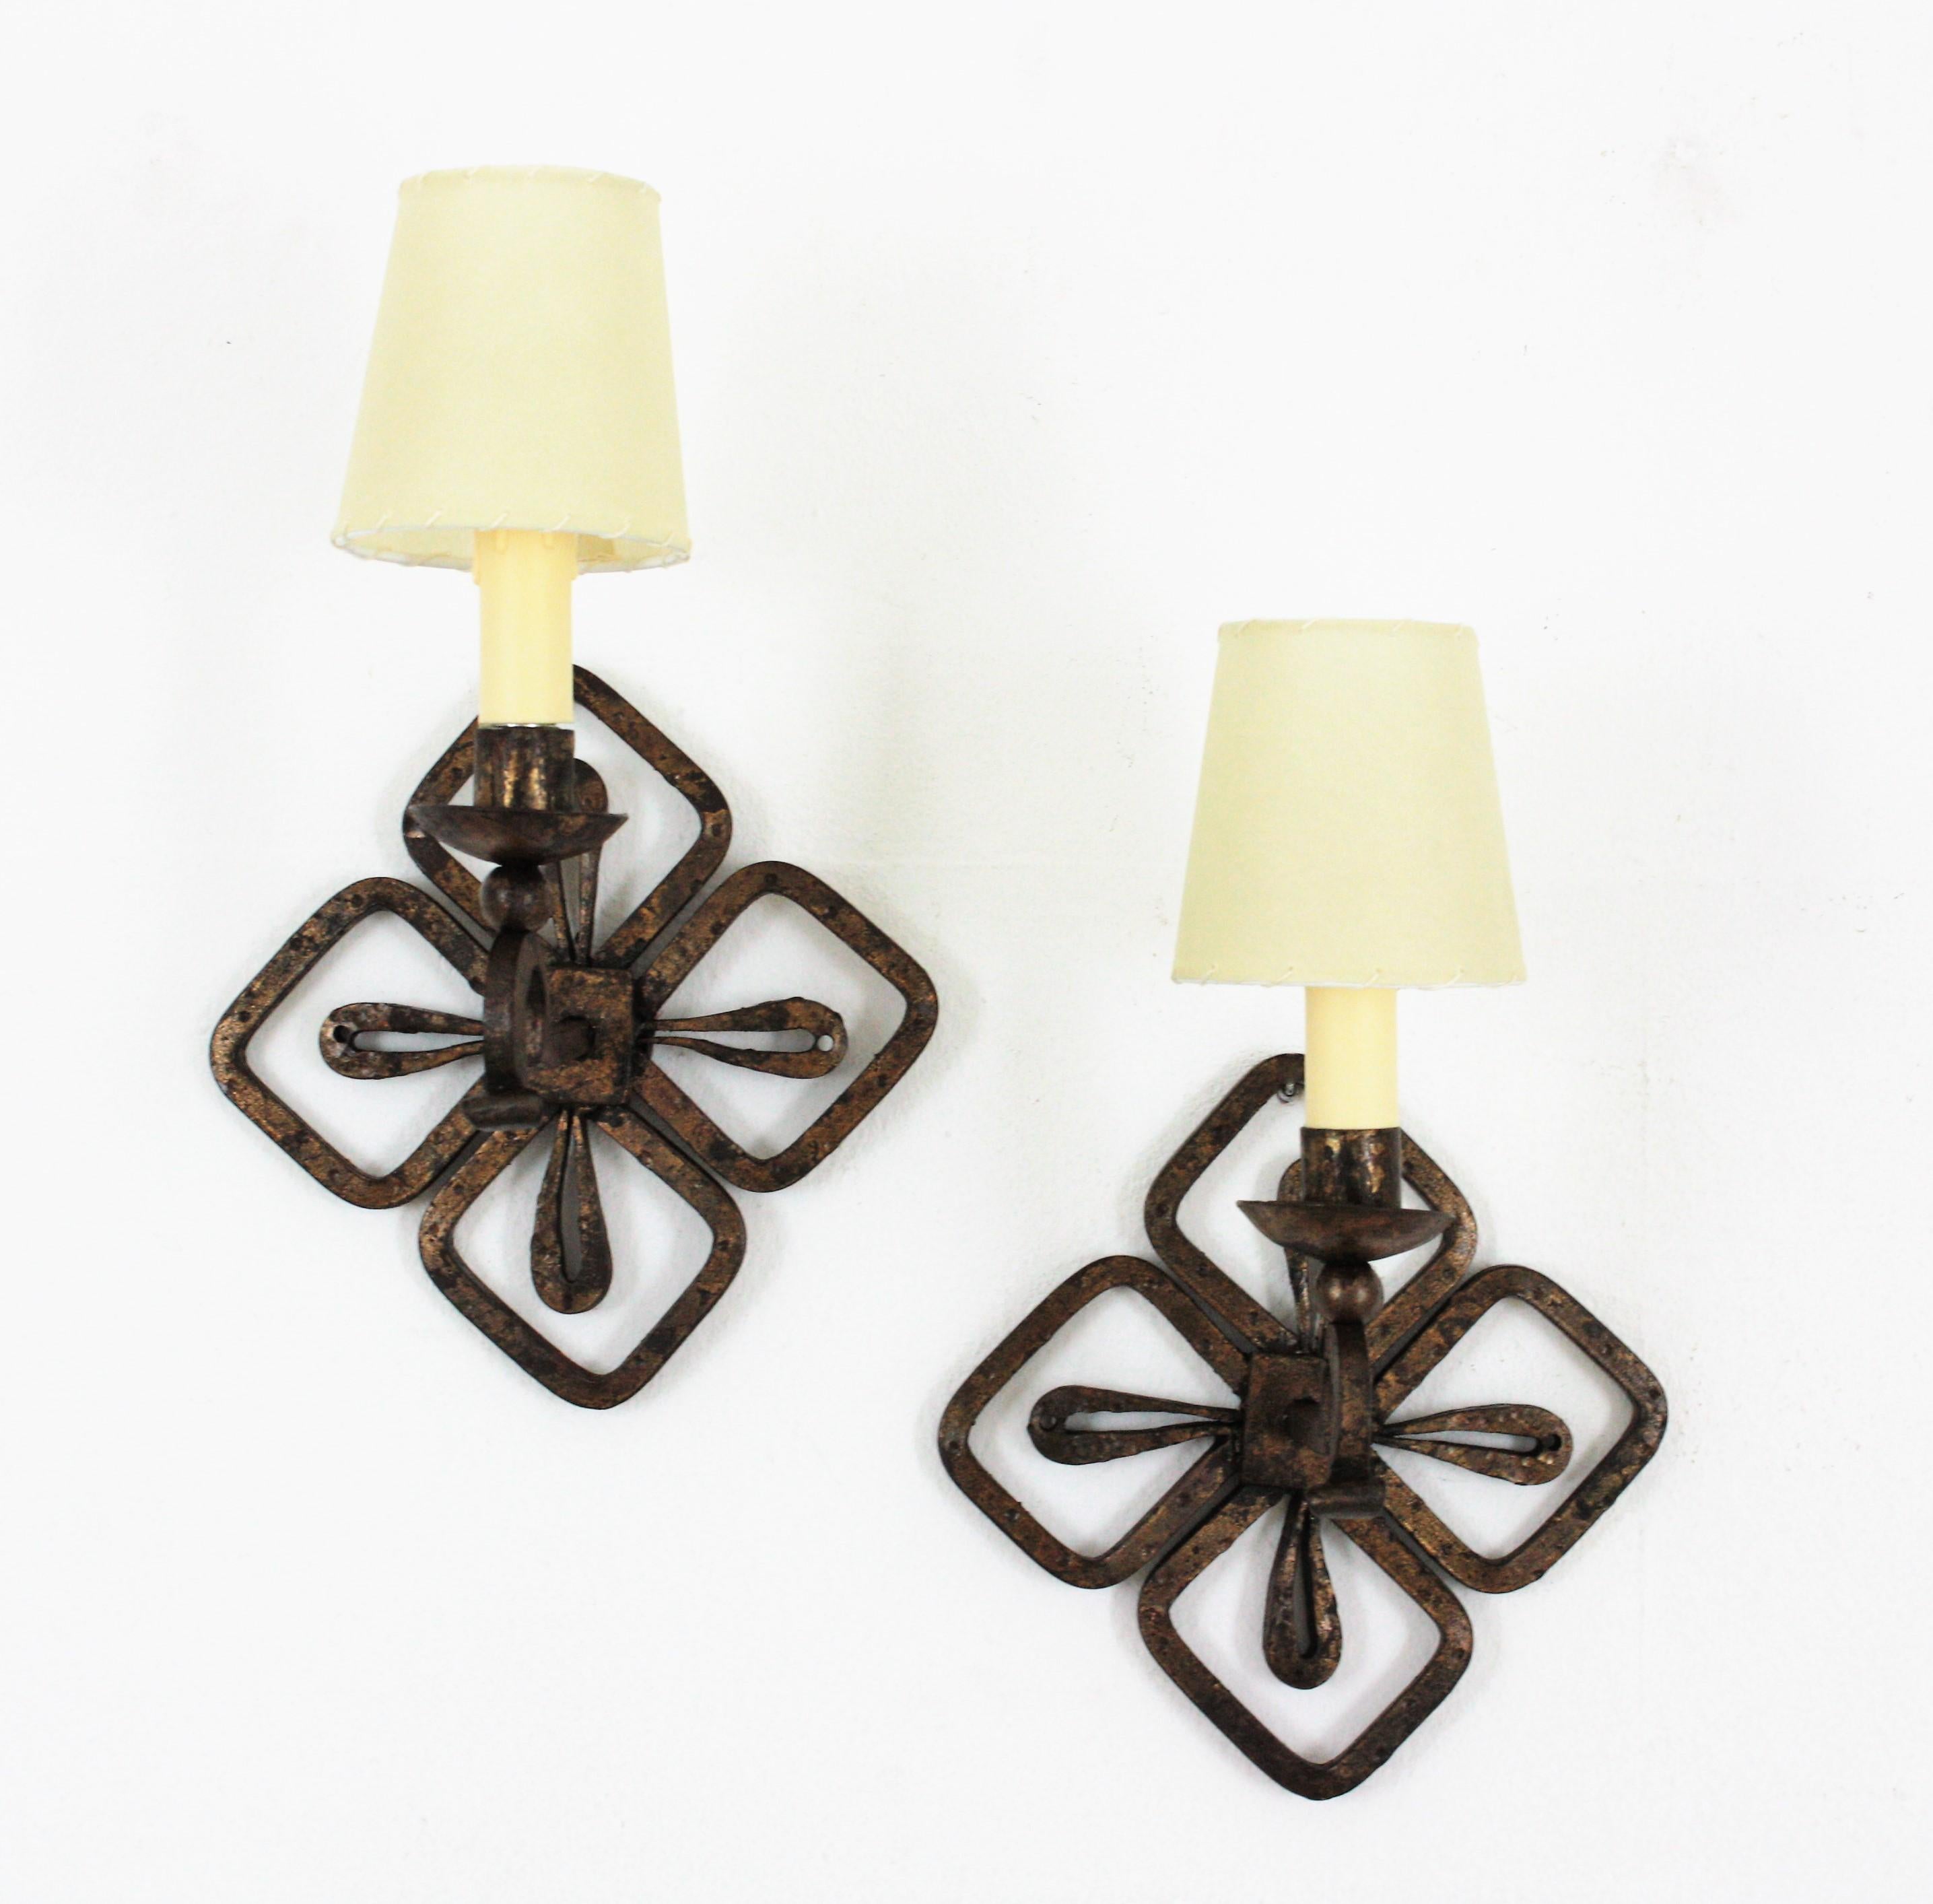 Elegant pair of wrought iron wall sconces with gold leaf gilding and Fleur de Lis Design, France, 1940s.
These hand forged light fixtures feature a fleur-de-lis shaped backplate holding an scroll ended arm with a candelabra holder with candle